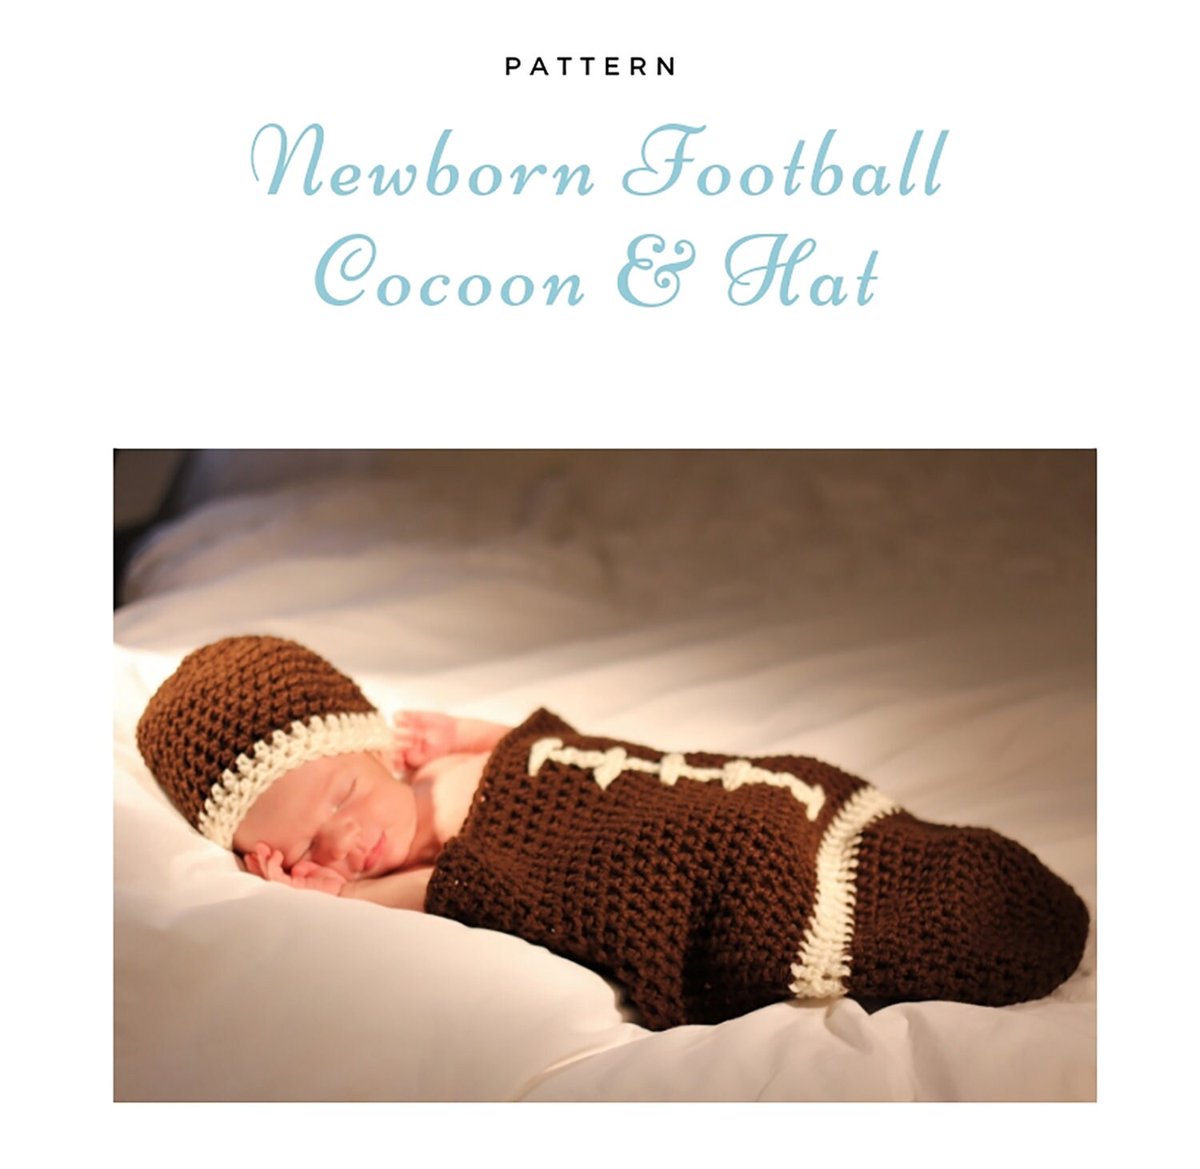 Excited to share this favorite in my #etsy shop: Crochet Football Cocoon and Hat - Newborn Photo Props - PATTERN ONLY etsy.me/3Y6FdM4 #crochet #babyfootball #footballcocoon #babyboyfootball #newbornphotoprop #babycocoon #babyphotoprop #crochetcocoon #foot